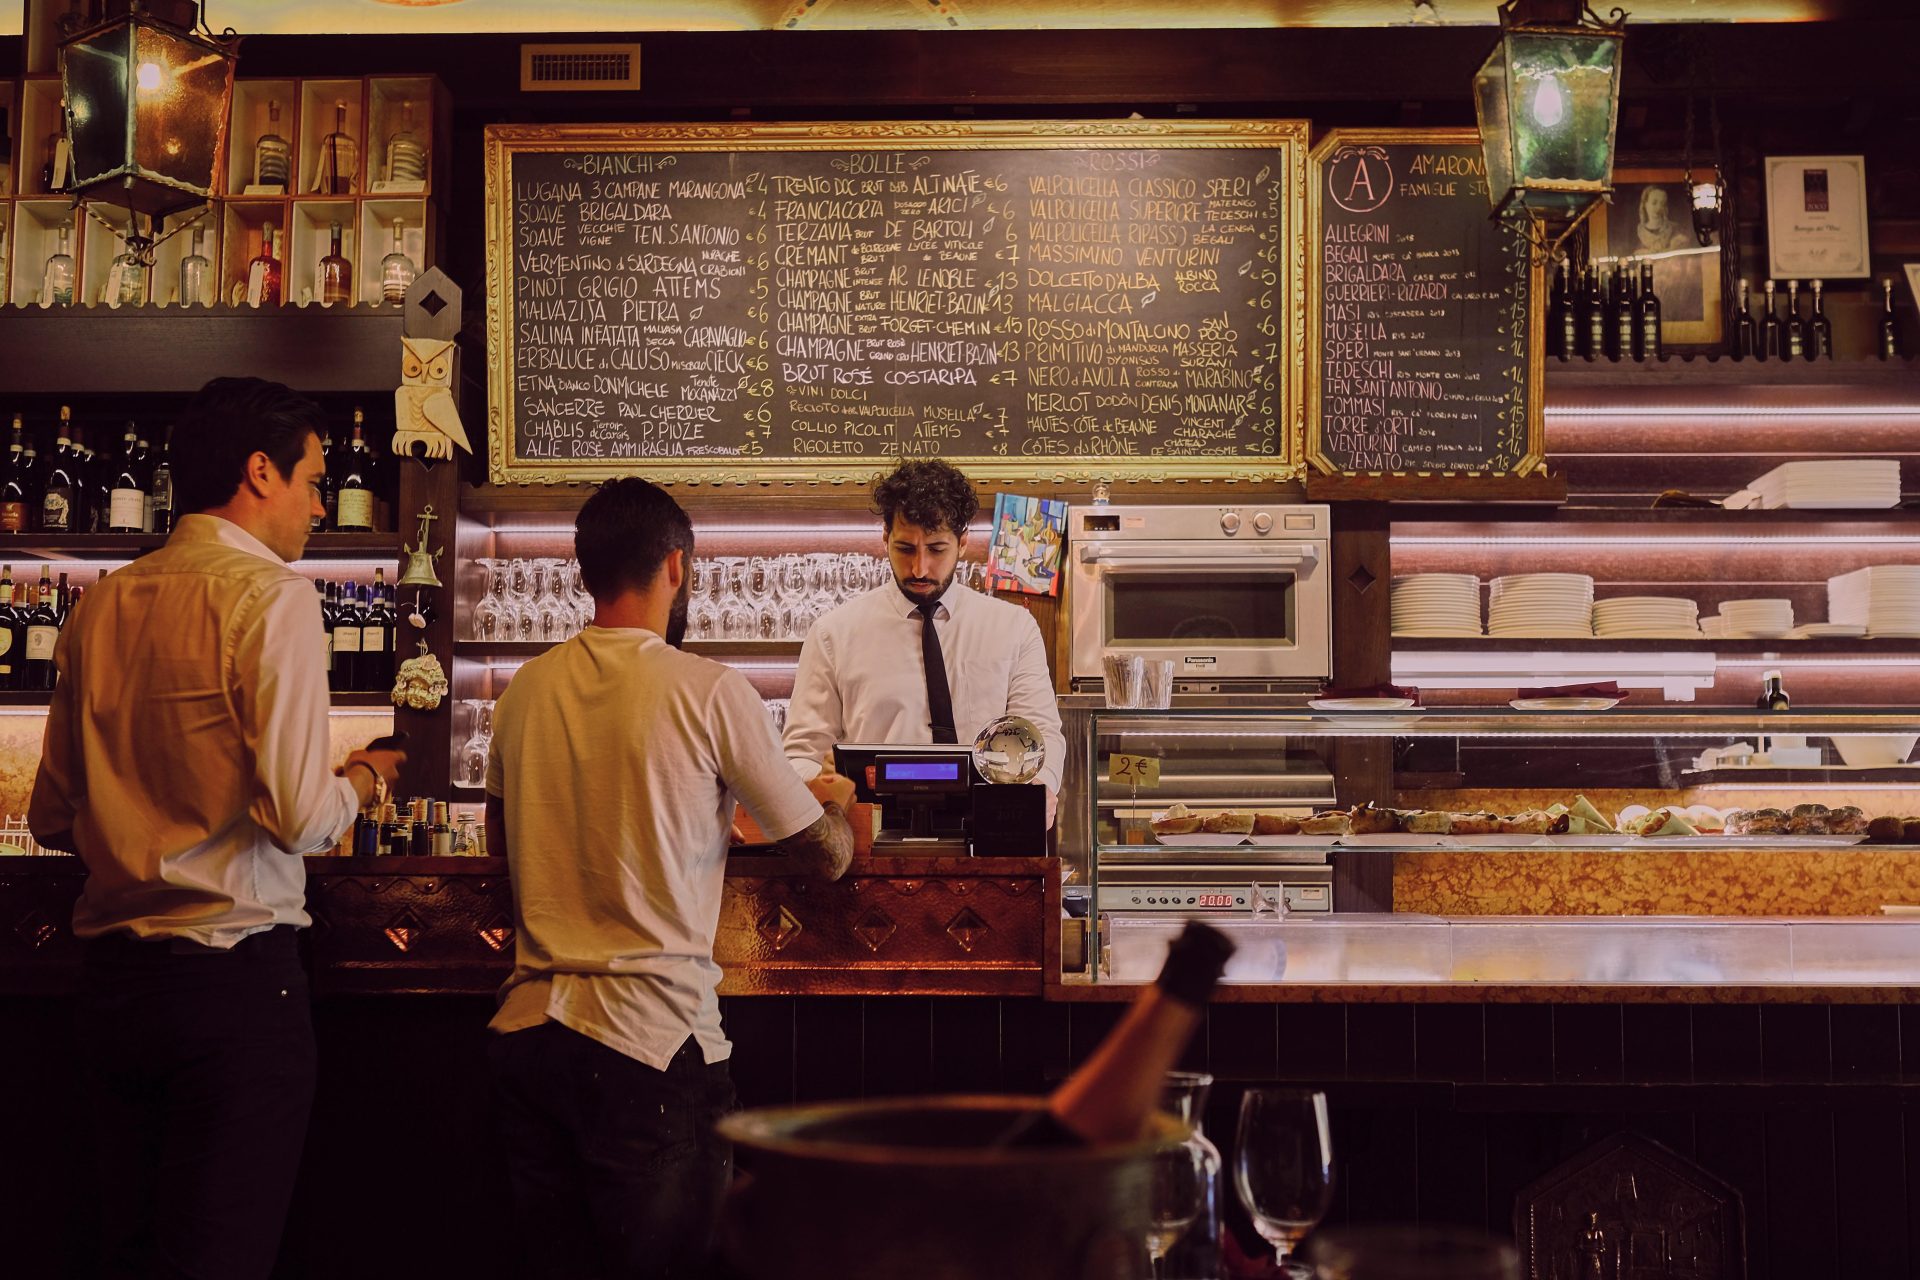 5 Ways to deliver excellent customer service at your restaurant